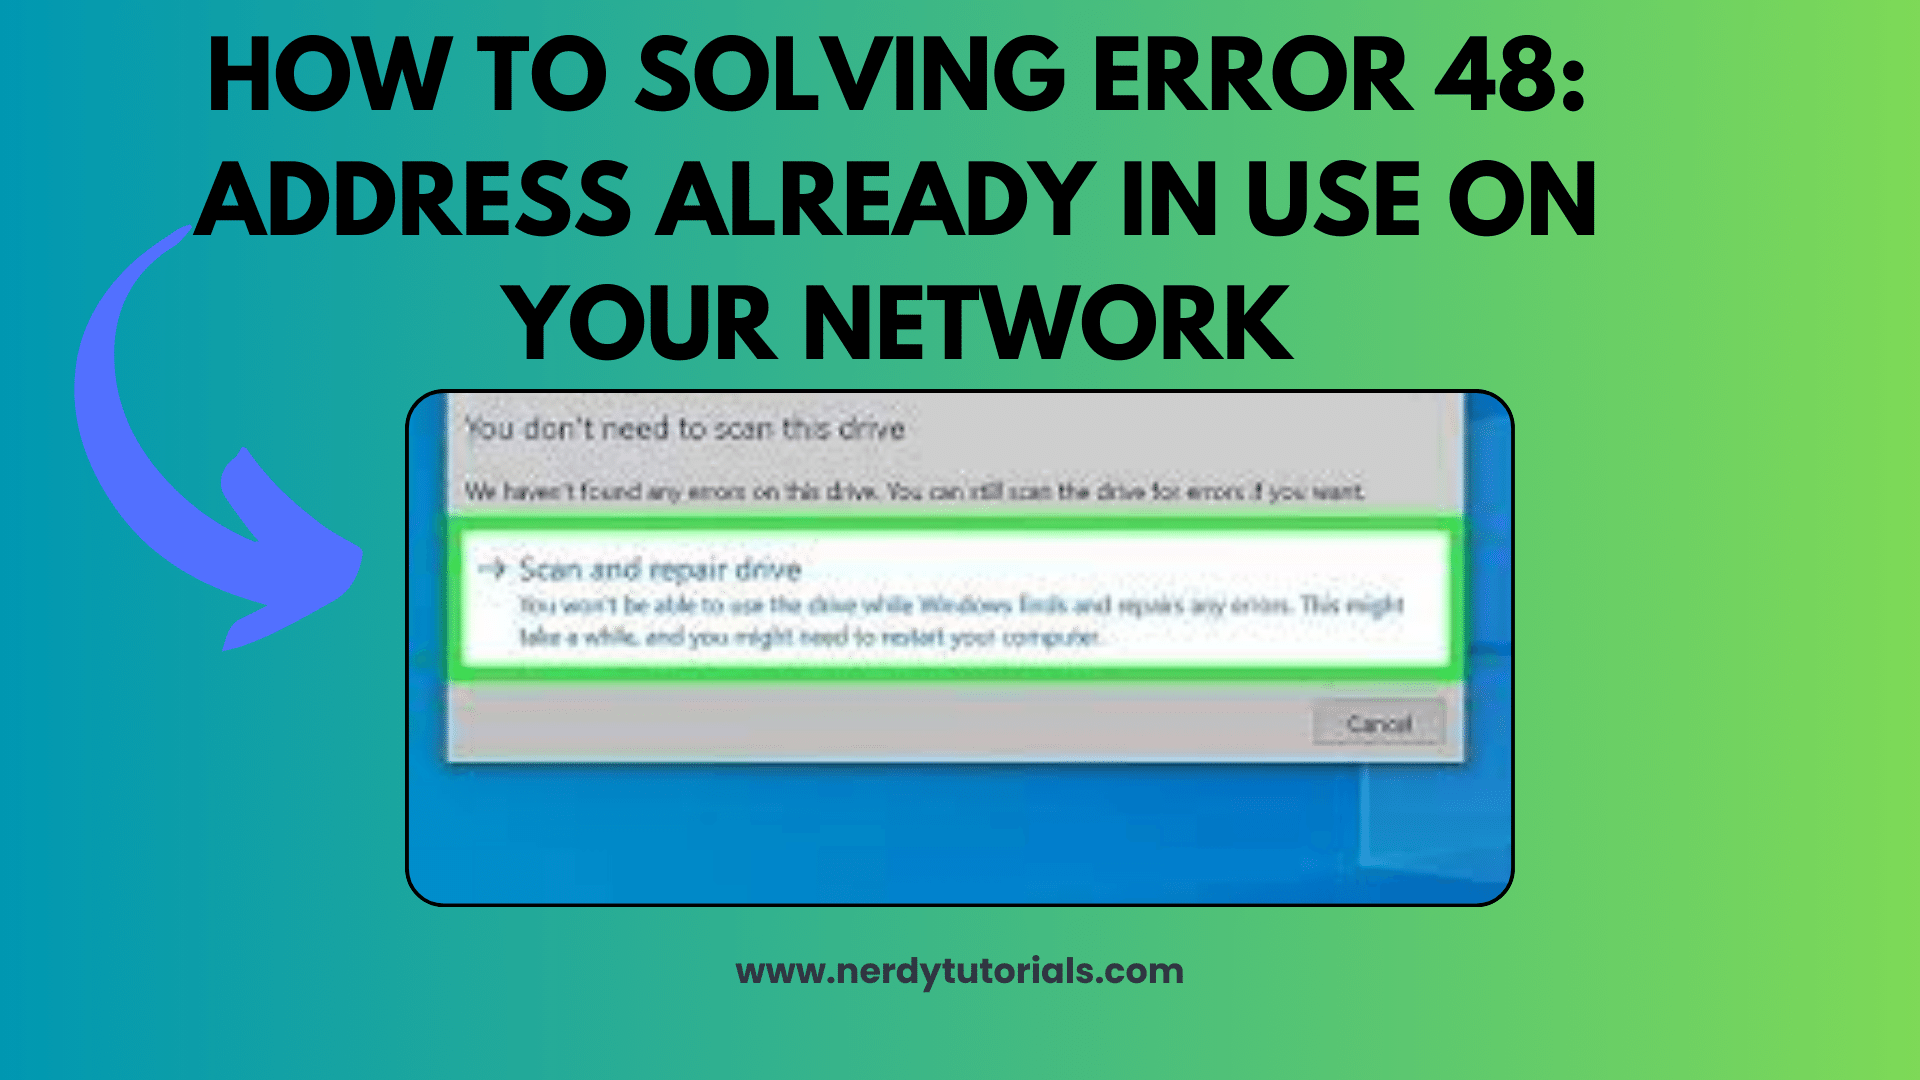 How To Solving Error 48: Address Already in Use on Your Network